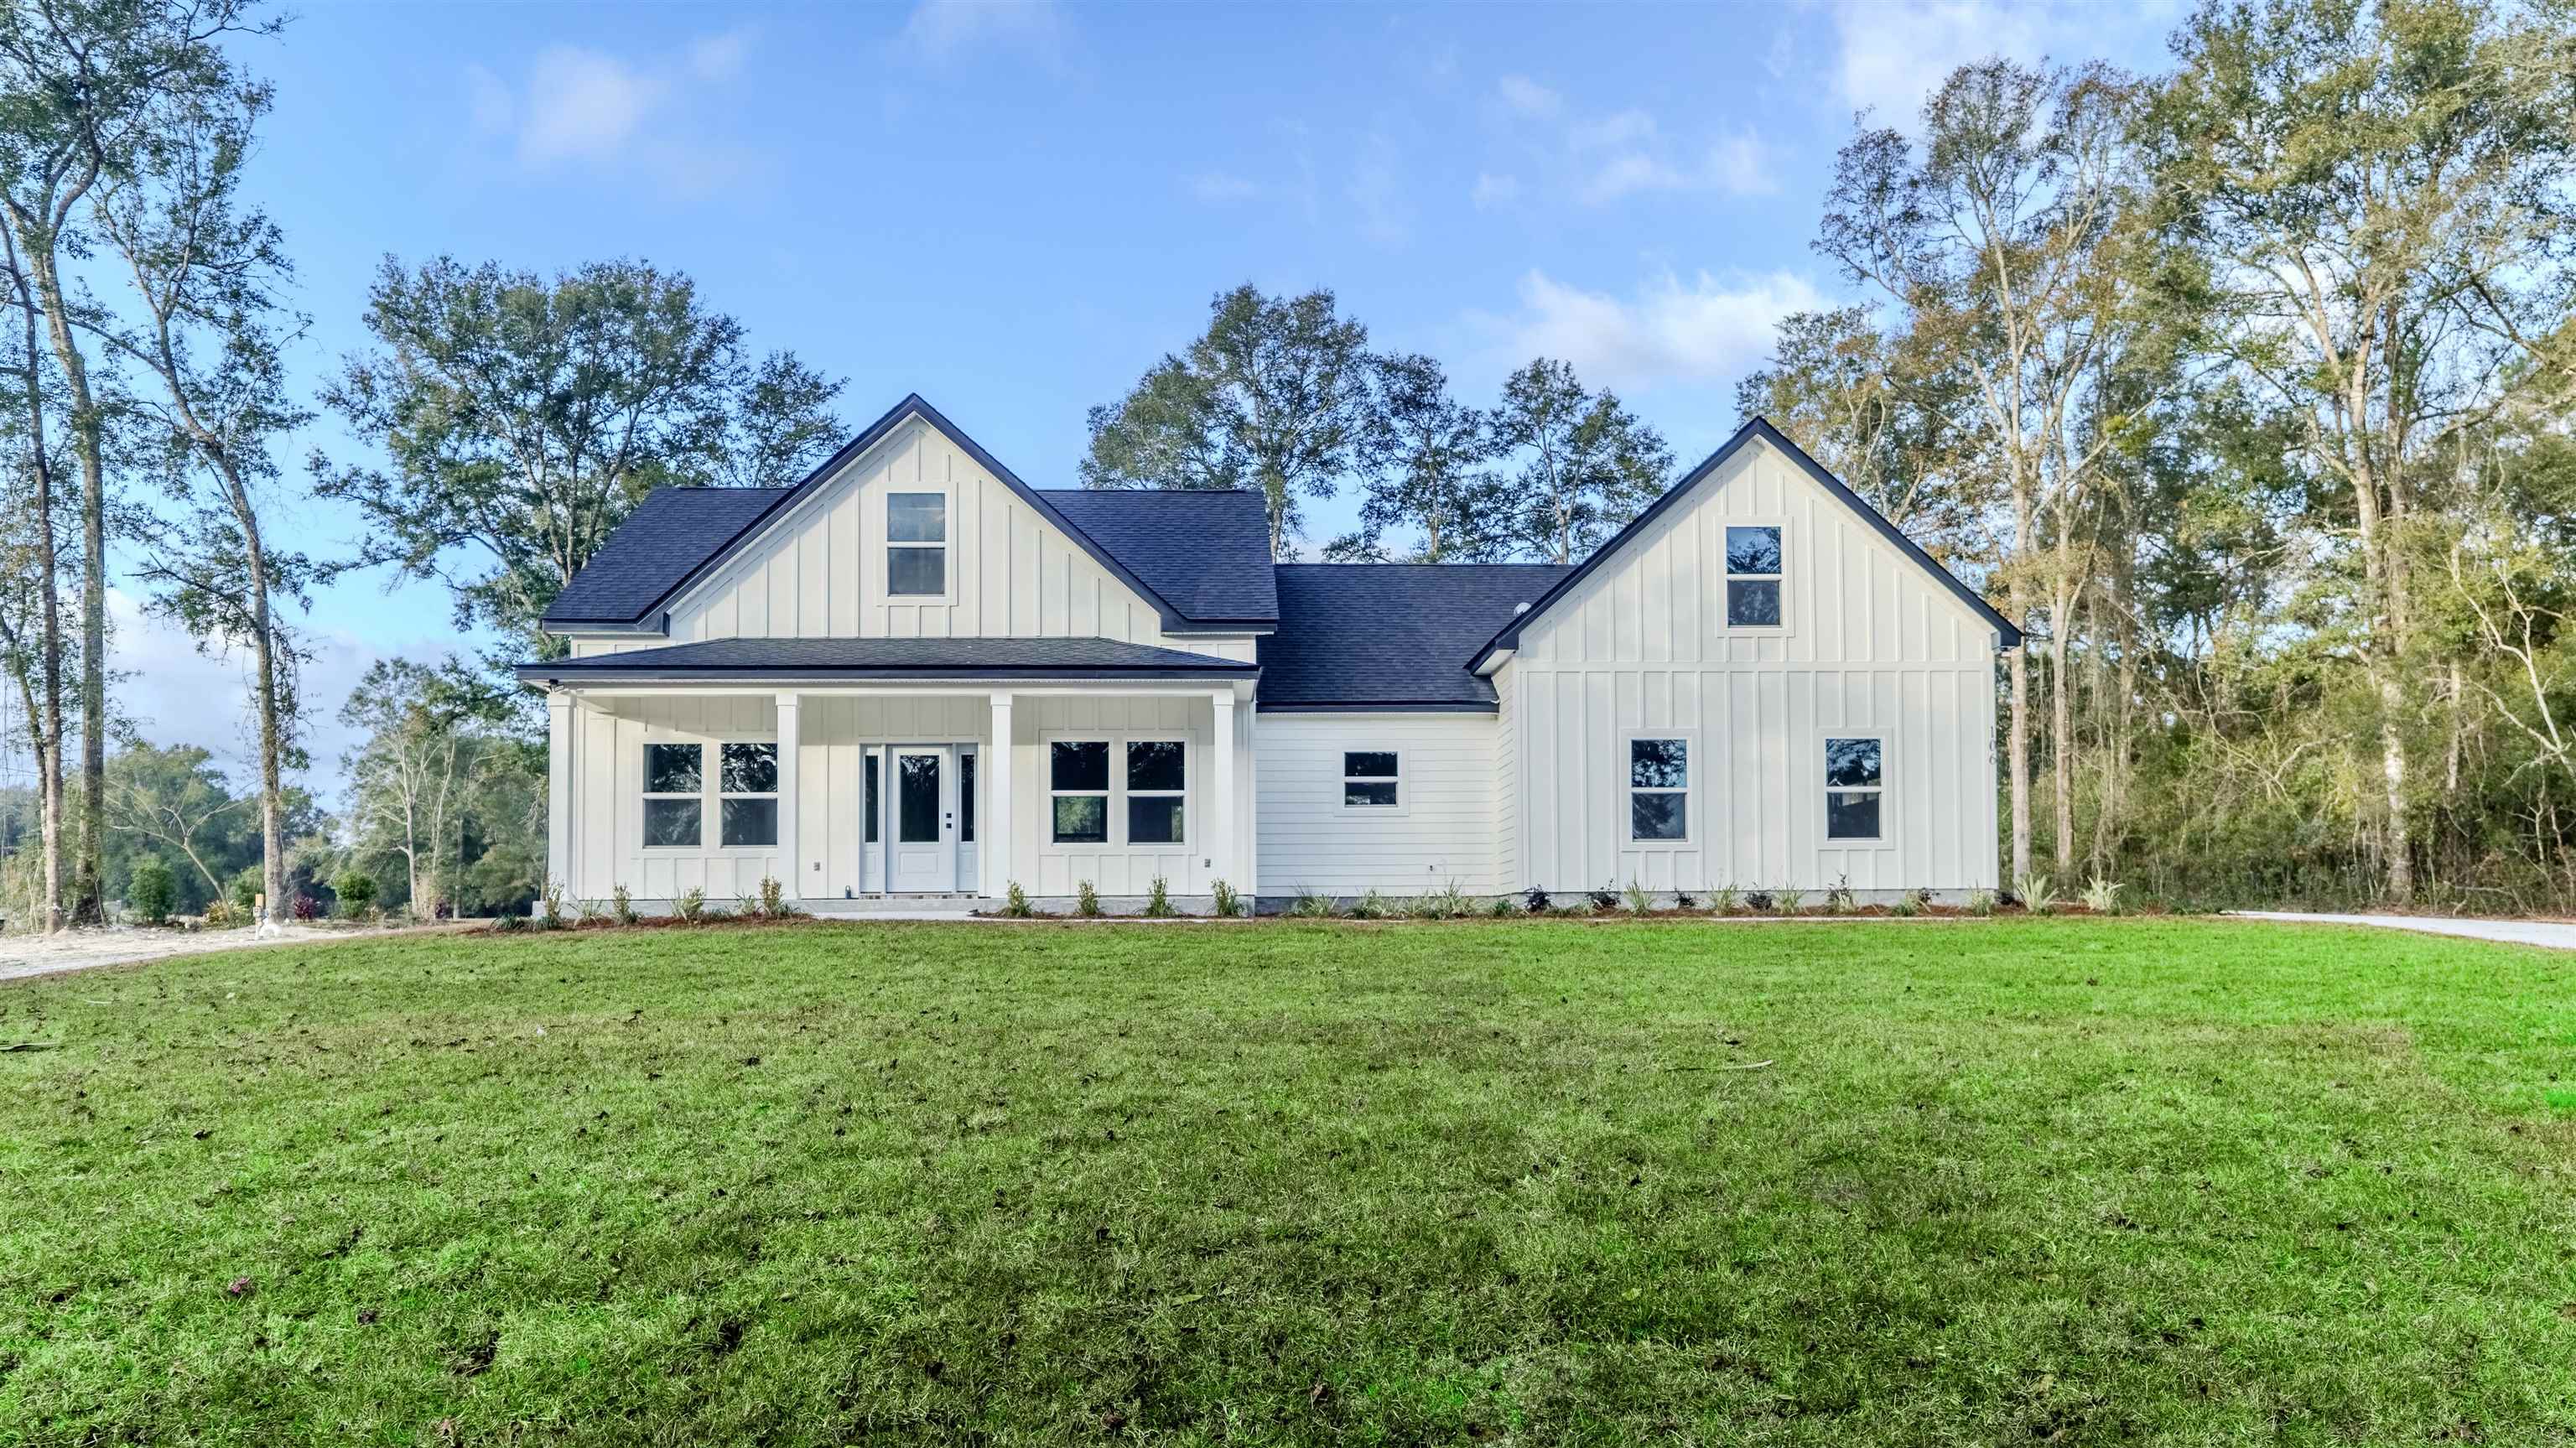 106 Country Club Drive,CRAWFORDVILLE,Florida 32327,4 Bedrooms Bedrooms,2 BathroomsBathrooms,Detached single family,106 Country Club Drive,368043